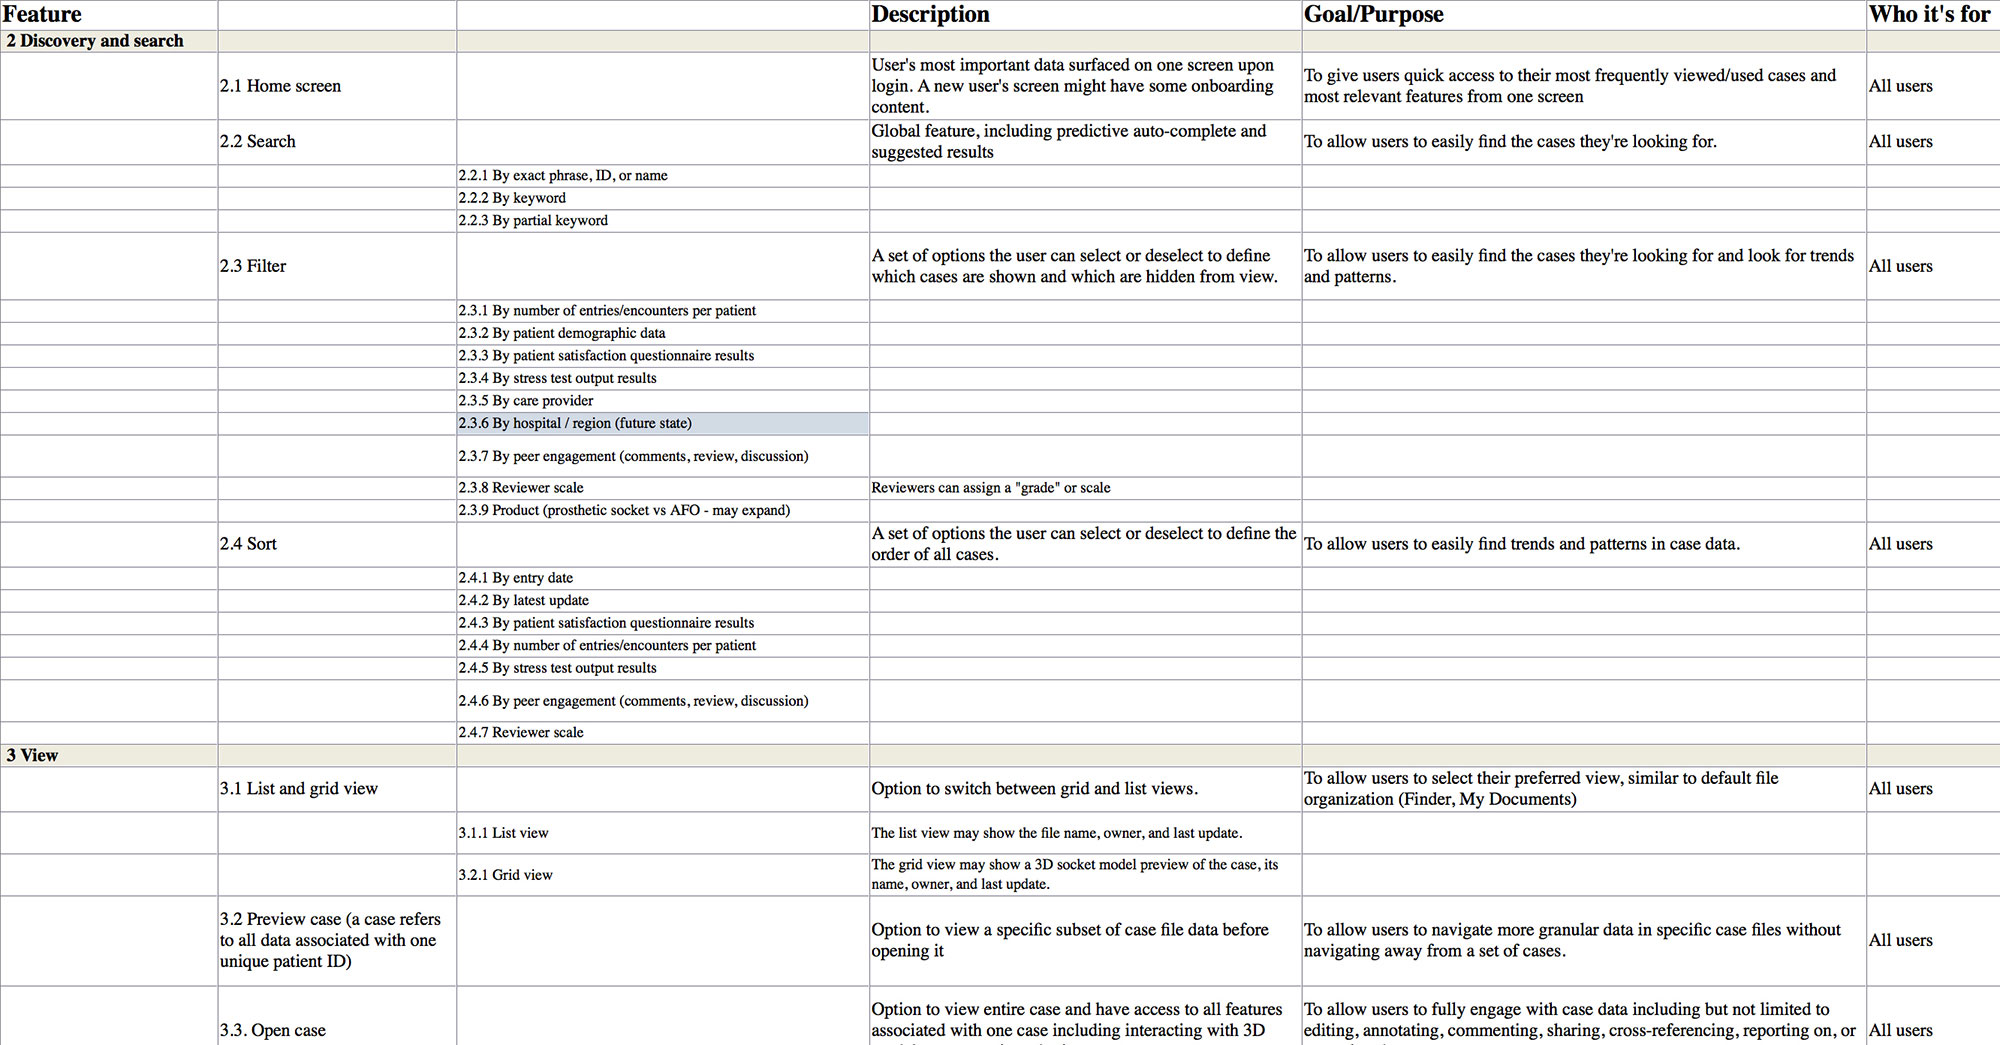 A spreadsheet containing all the minimum viable product features for the platform, along with descriptions, purpose/rationale for the feature, and the user group it is for.